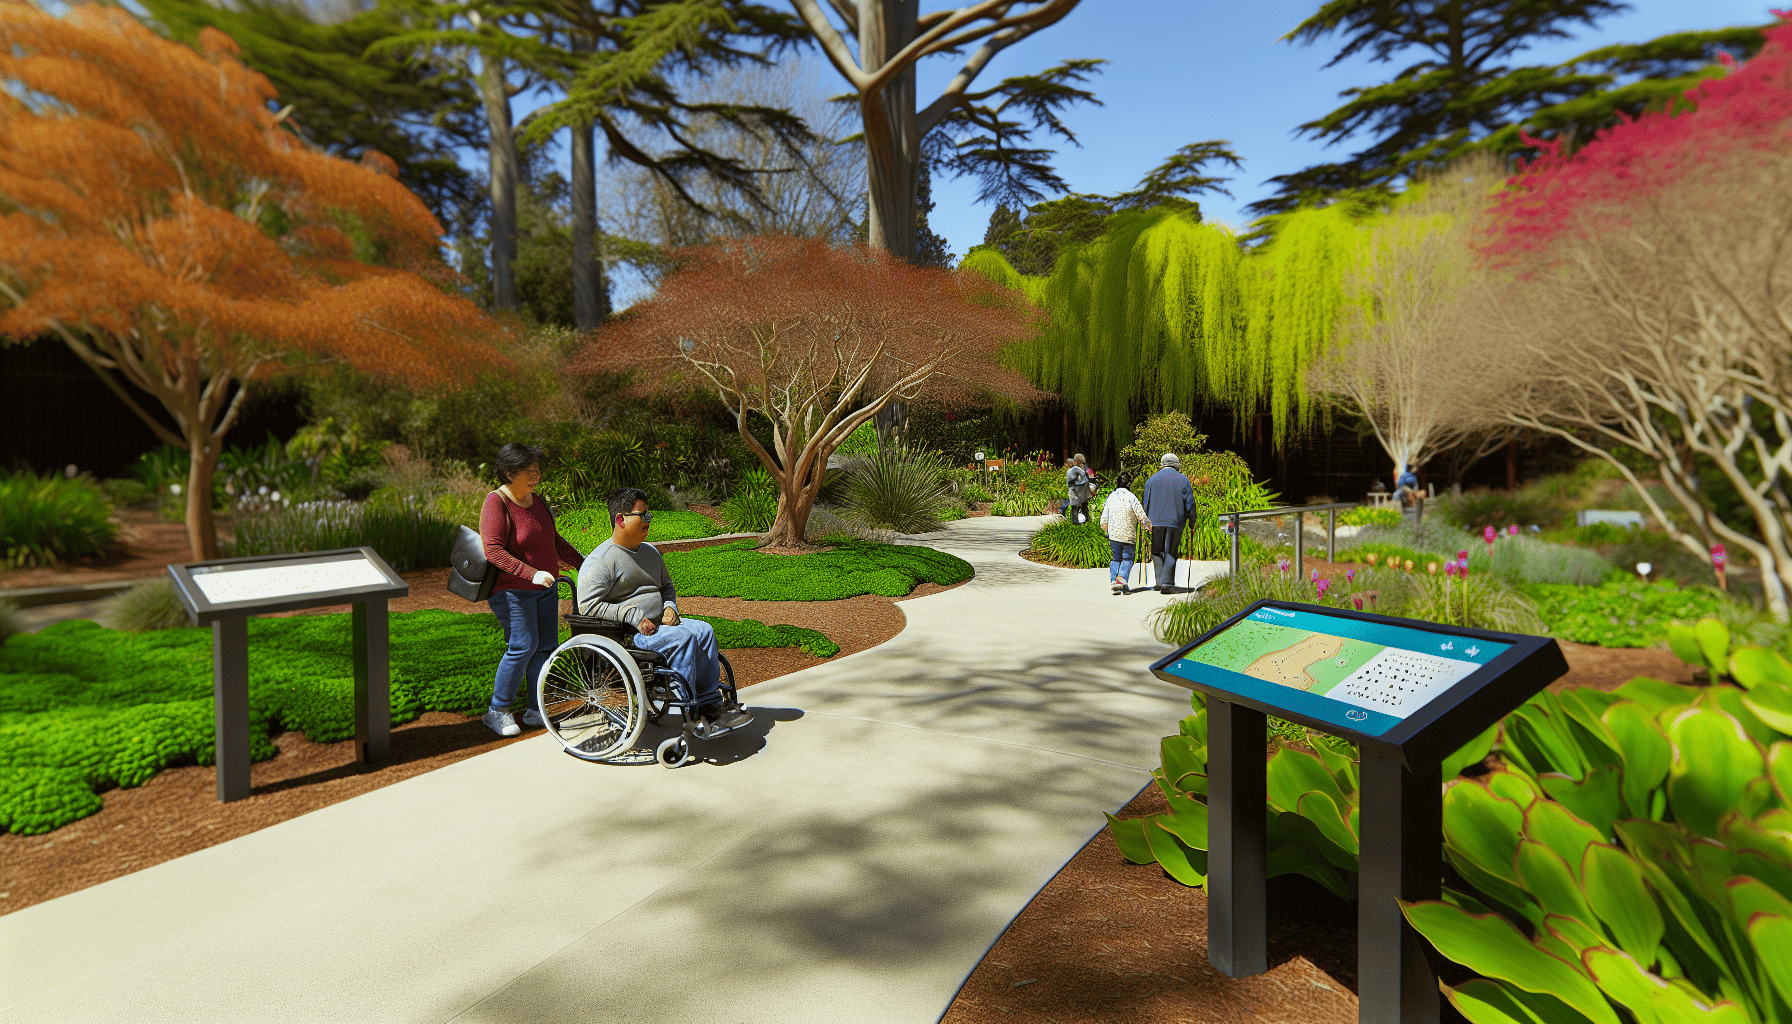 Accessibility features at Botanic Gardens